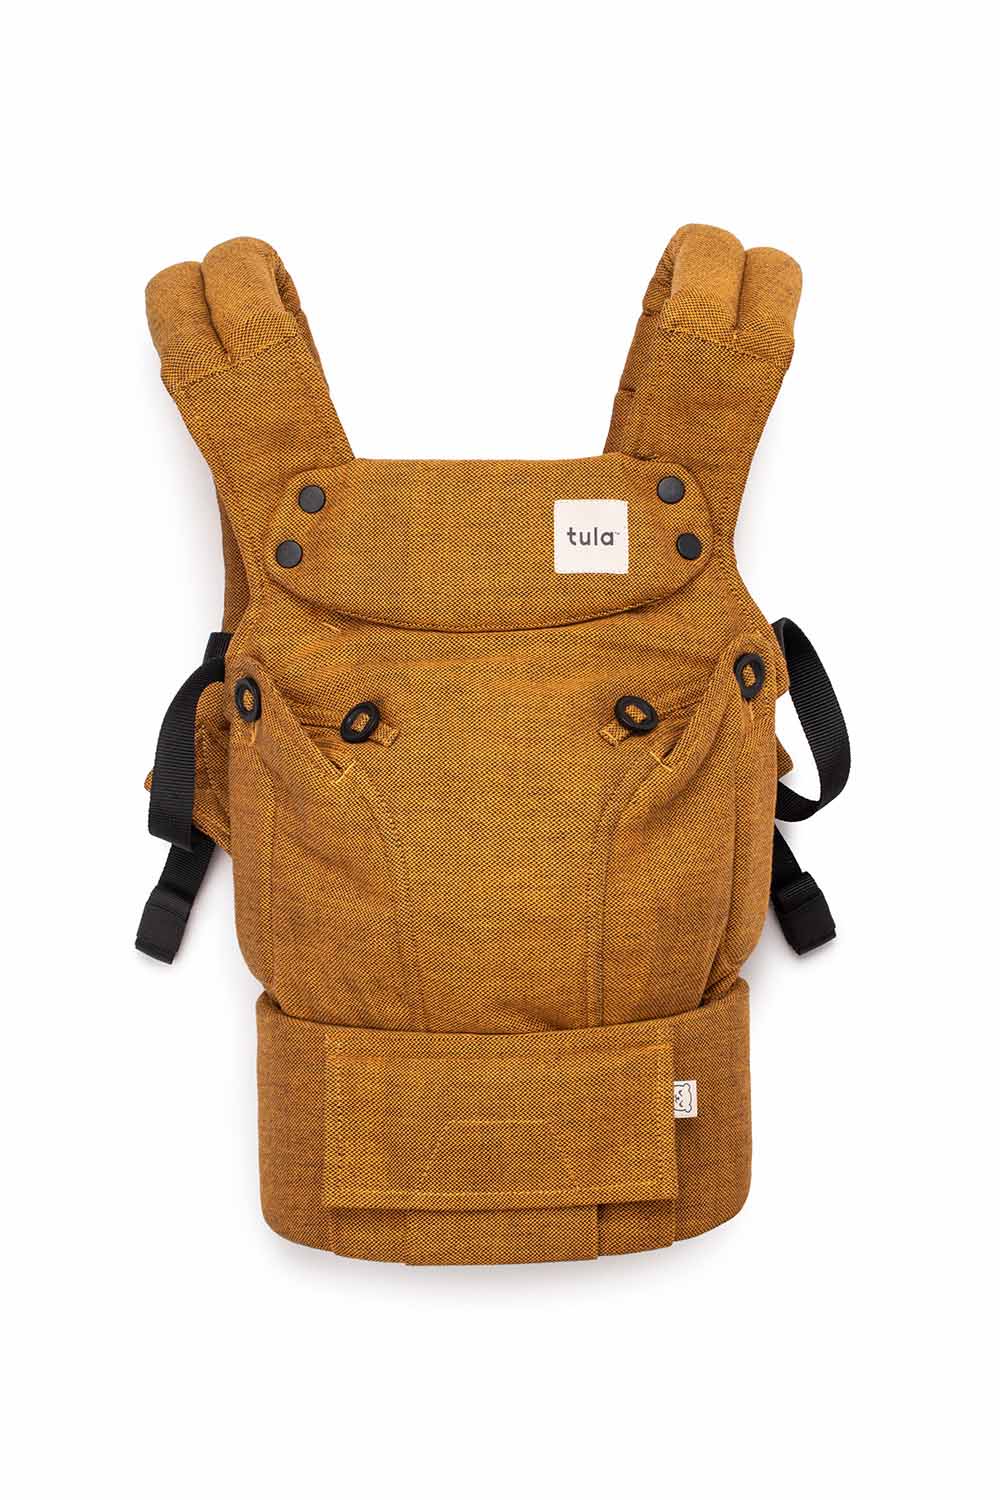 Camote - Signature Handwoven Explore Baby Carrier